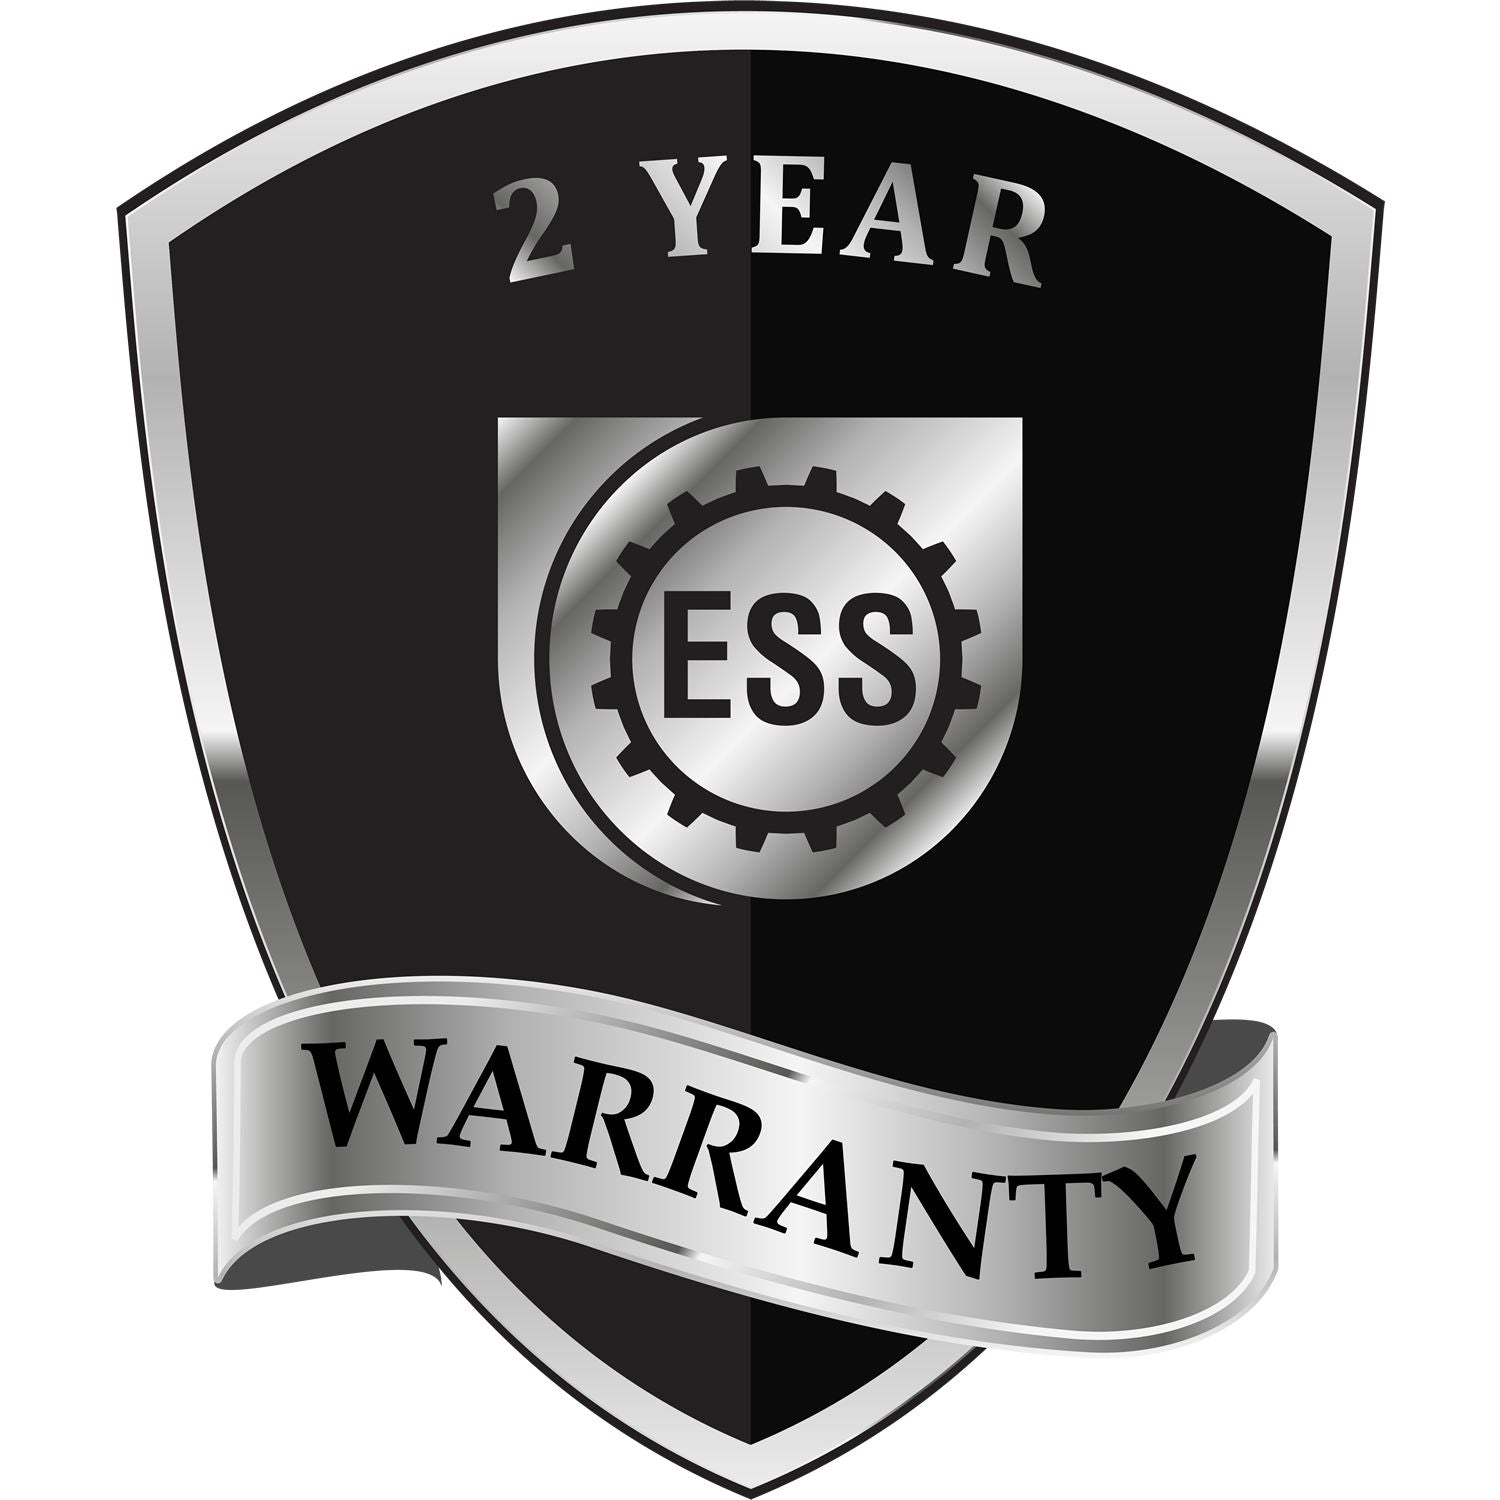 A badge or emblem showing a warranty icon for the Oregon Engineer Desk Seal